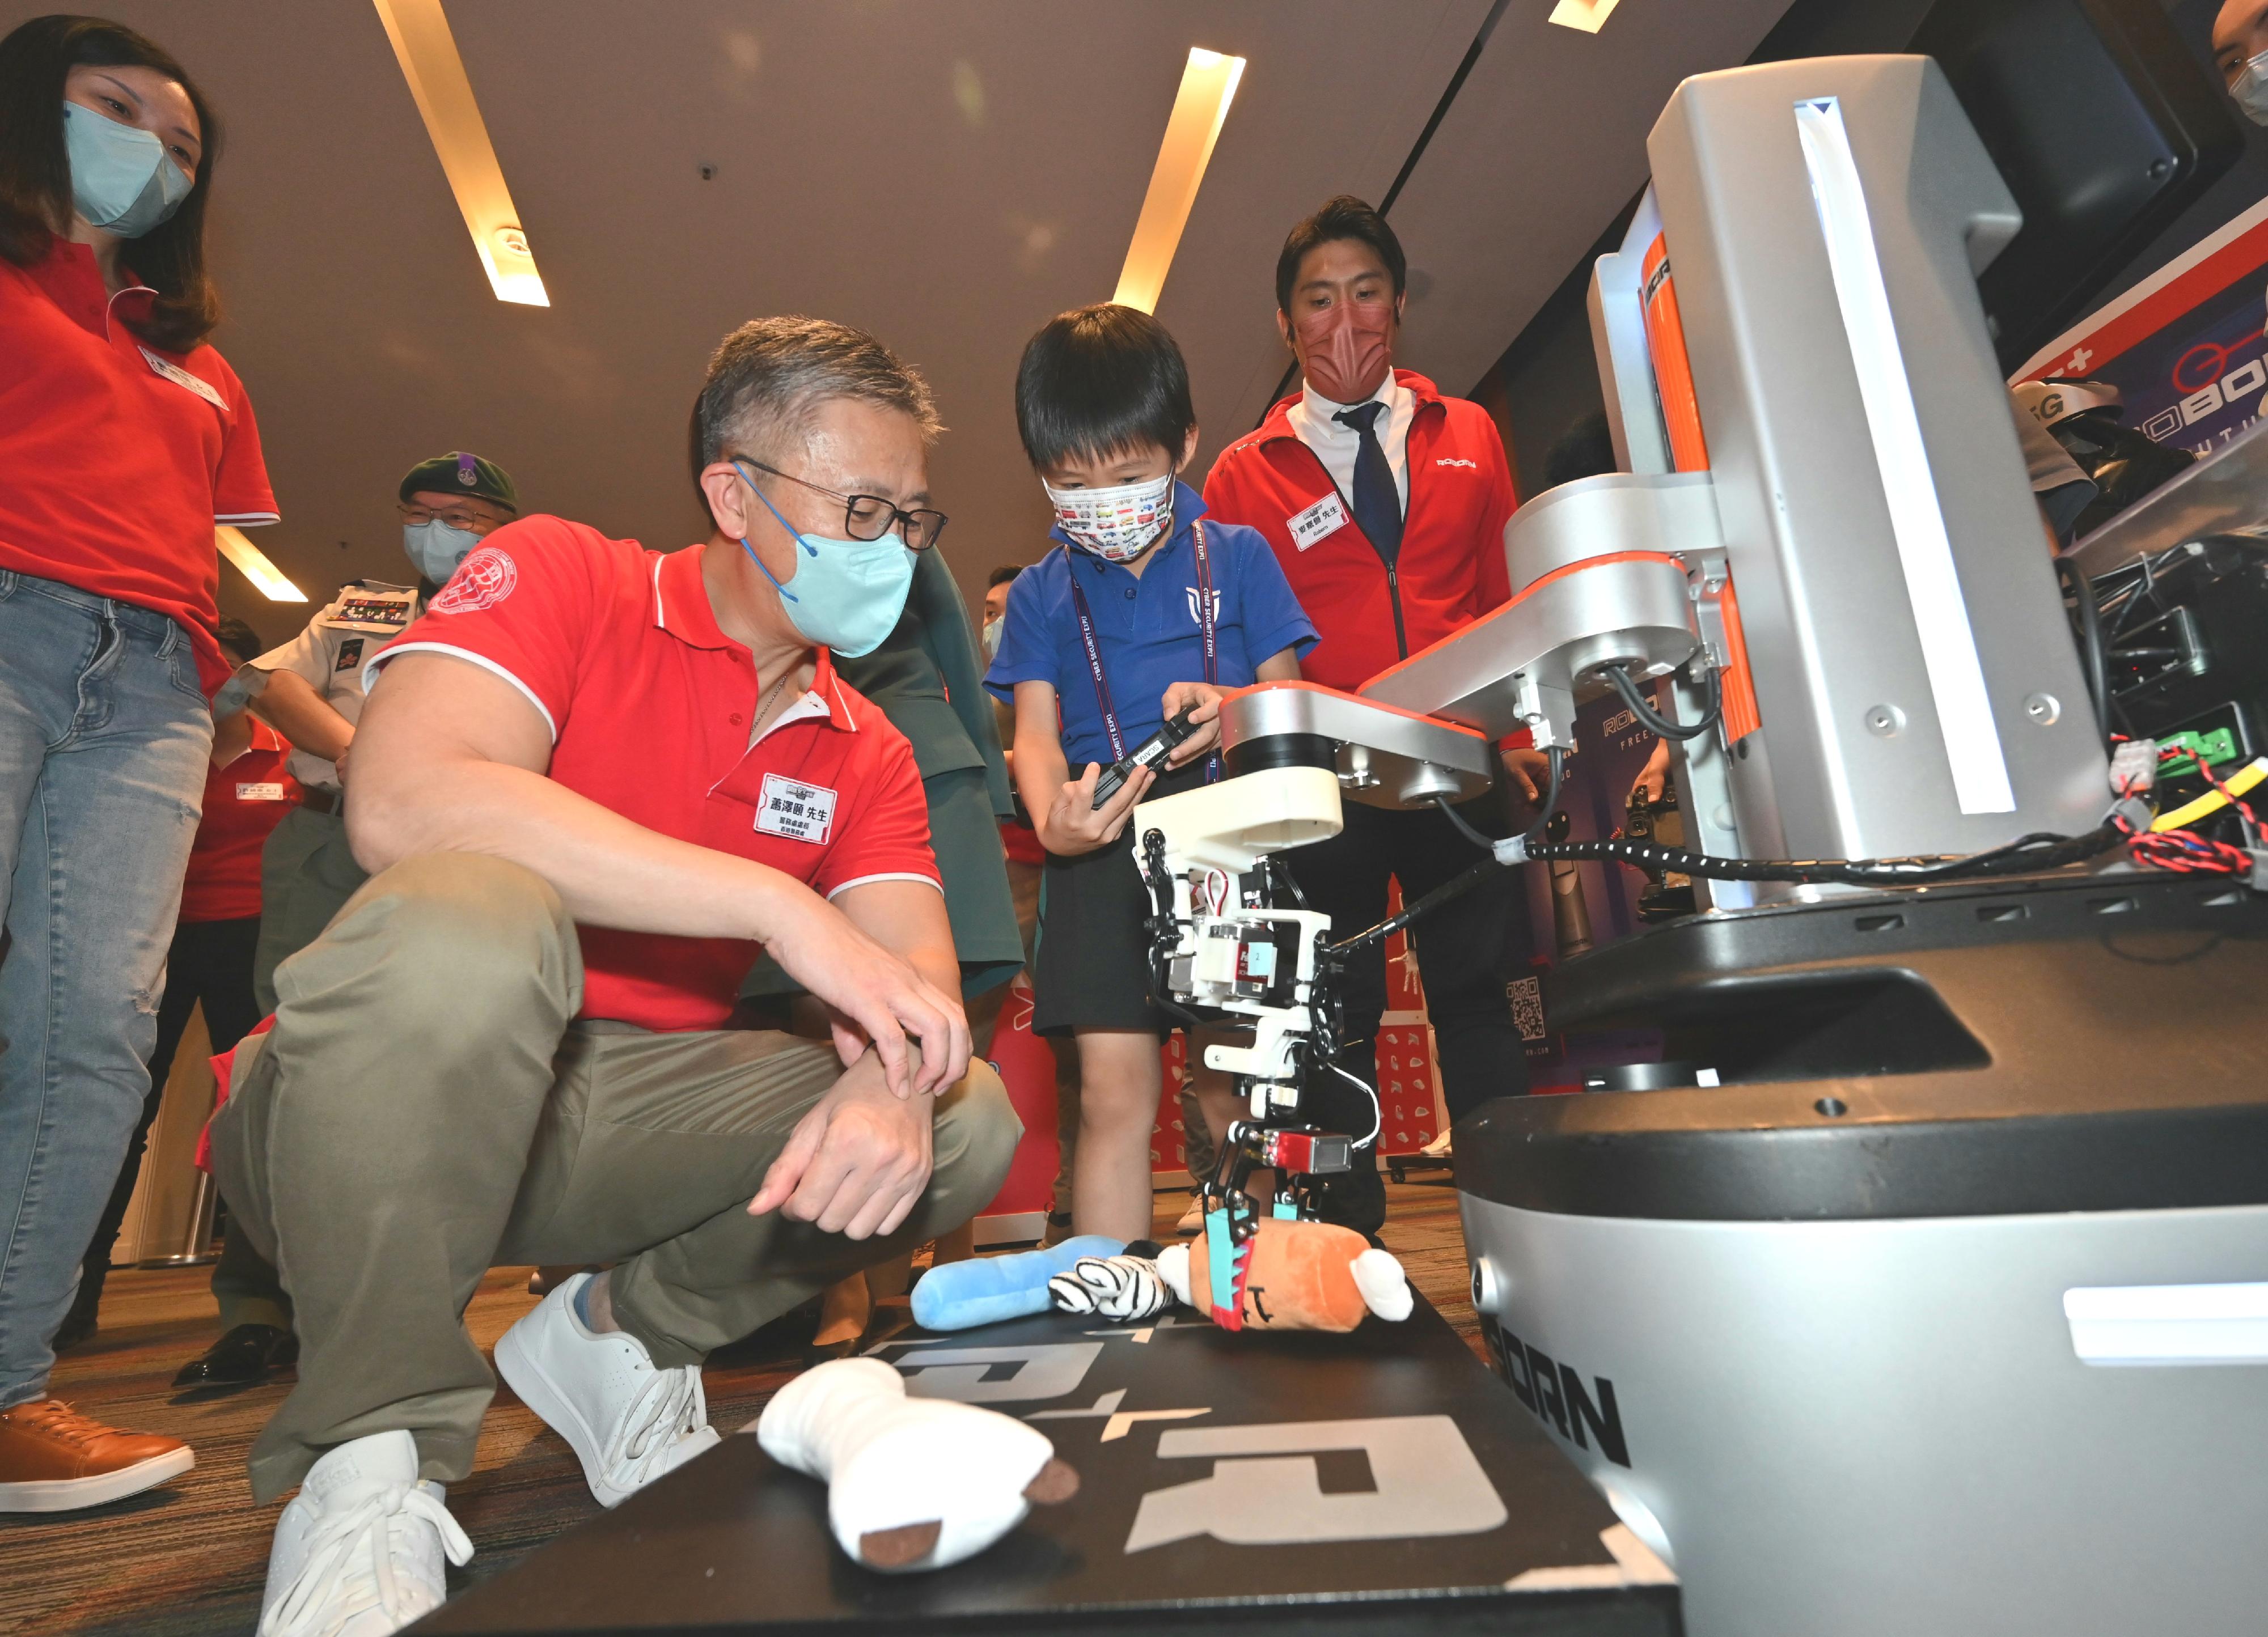 The Cyber Security Expo 2022 kicks off today (September 17). Photo shows the Commissioner of the Police, Mr Siu Chak-yee (second left) watching a robot demonstration by a student.